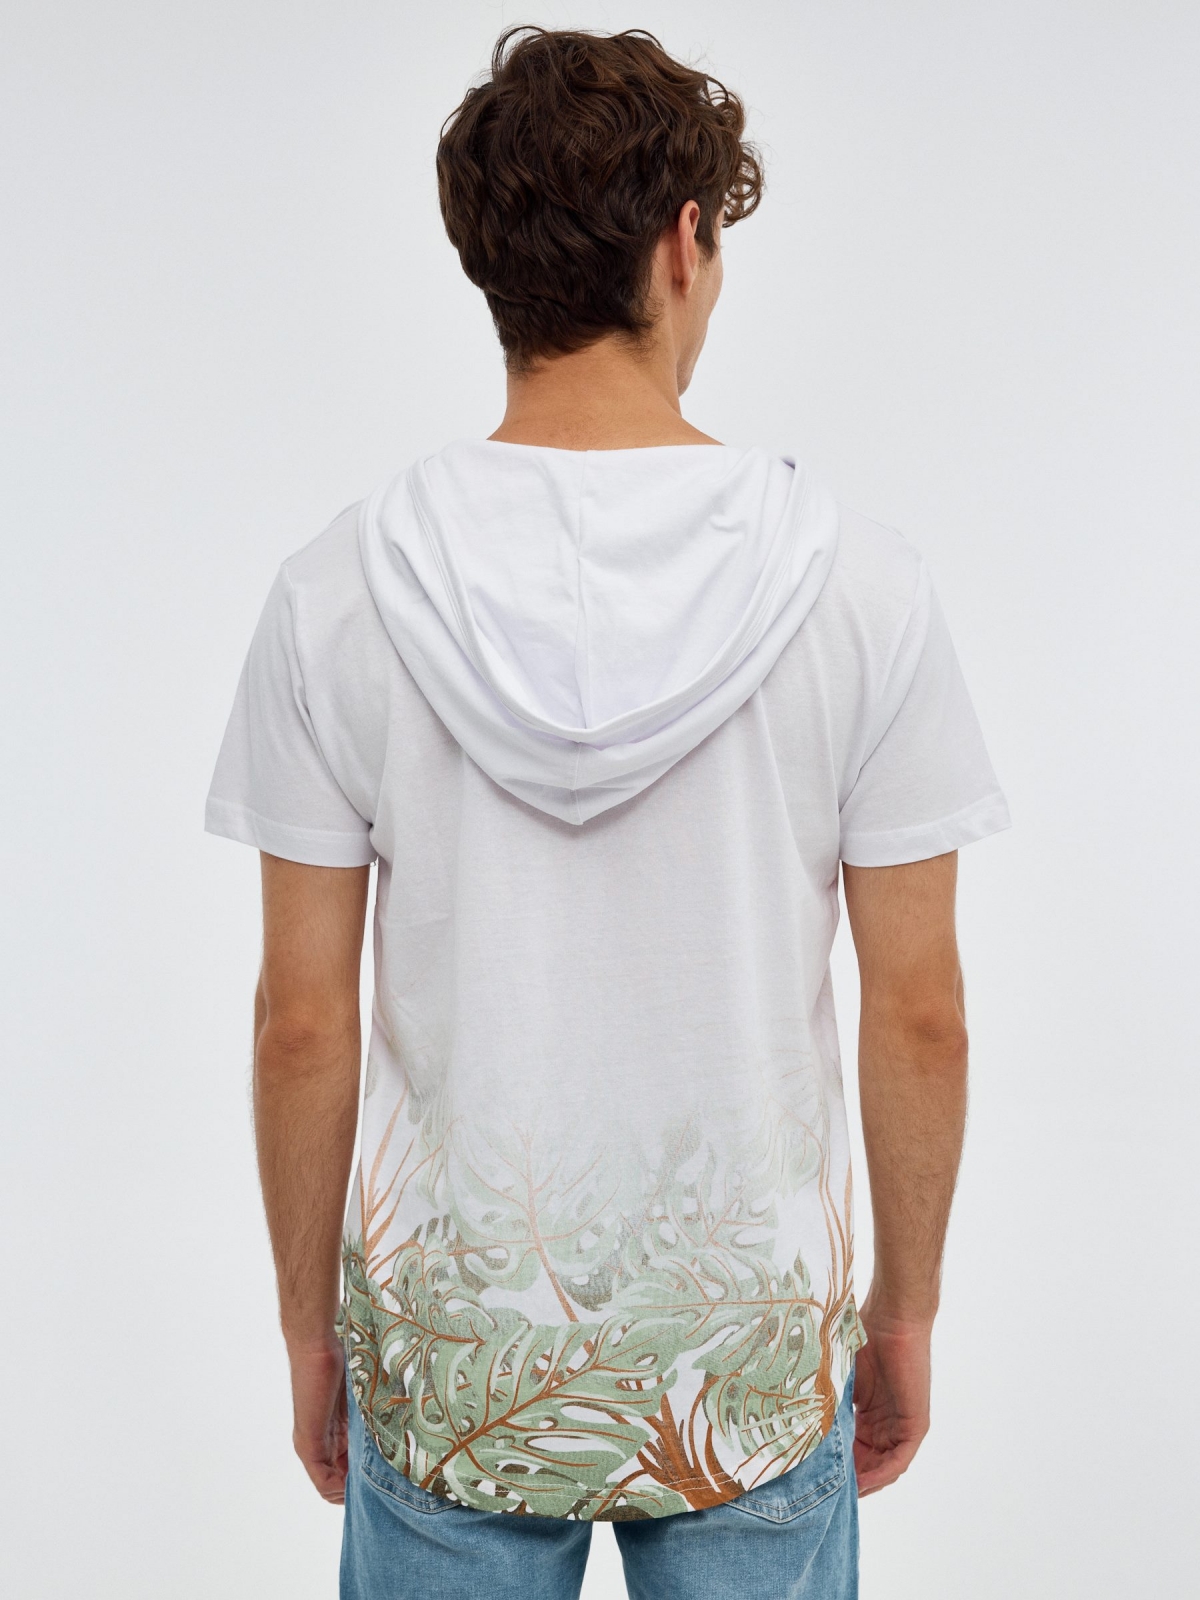 Tropic T-shirt white middle back view